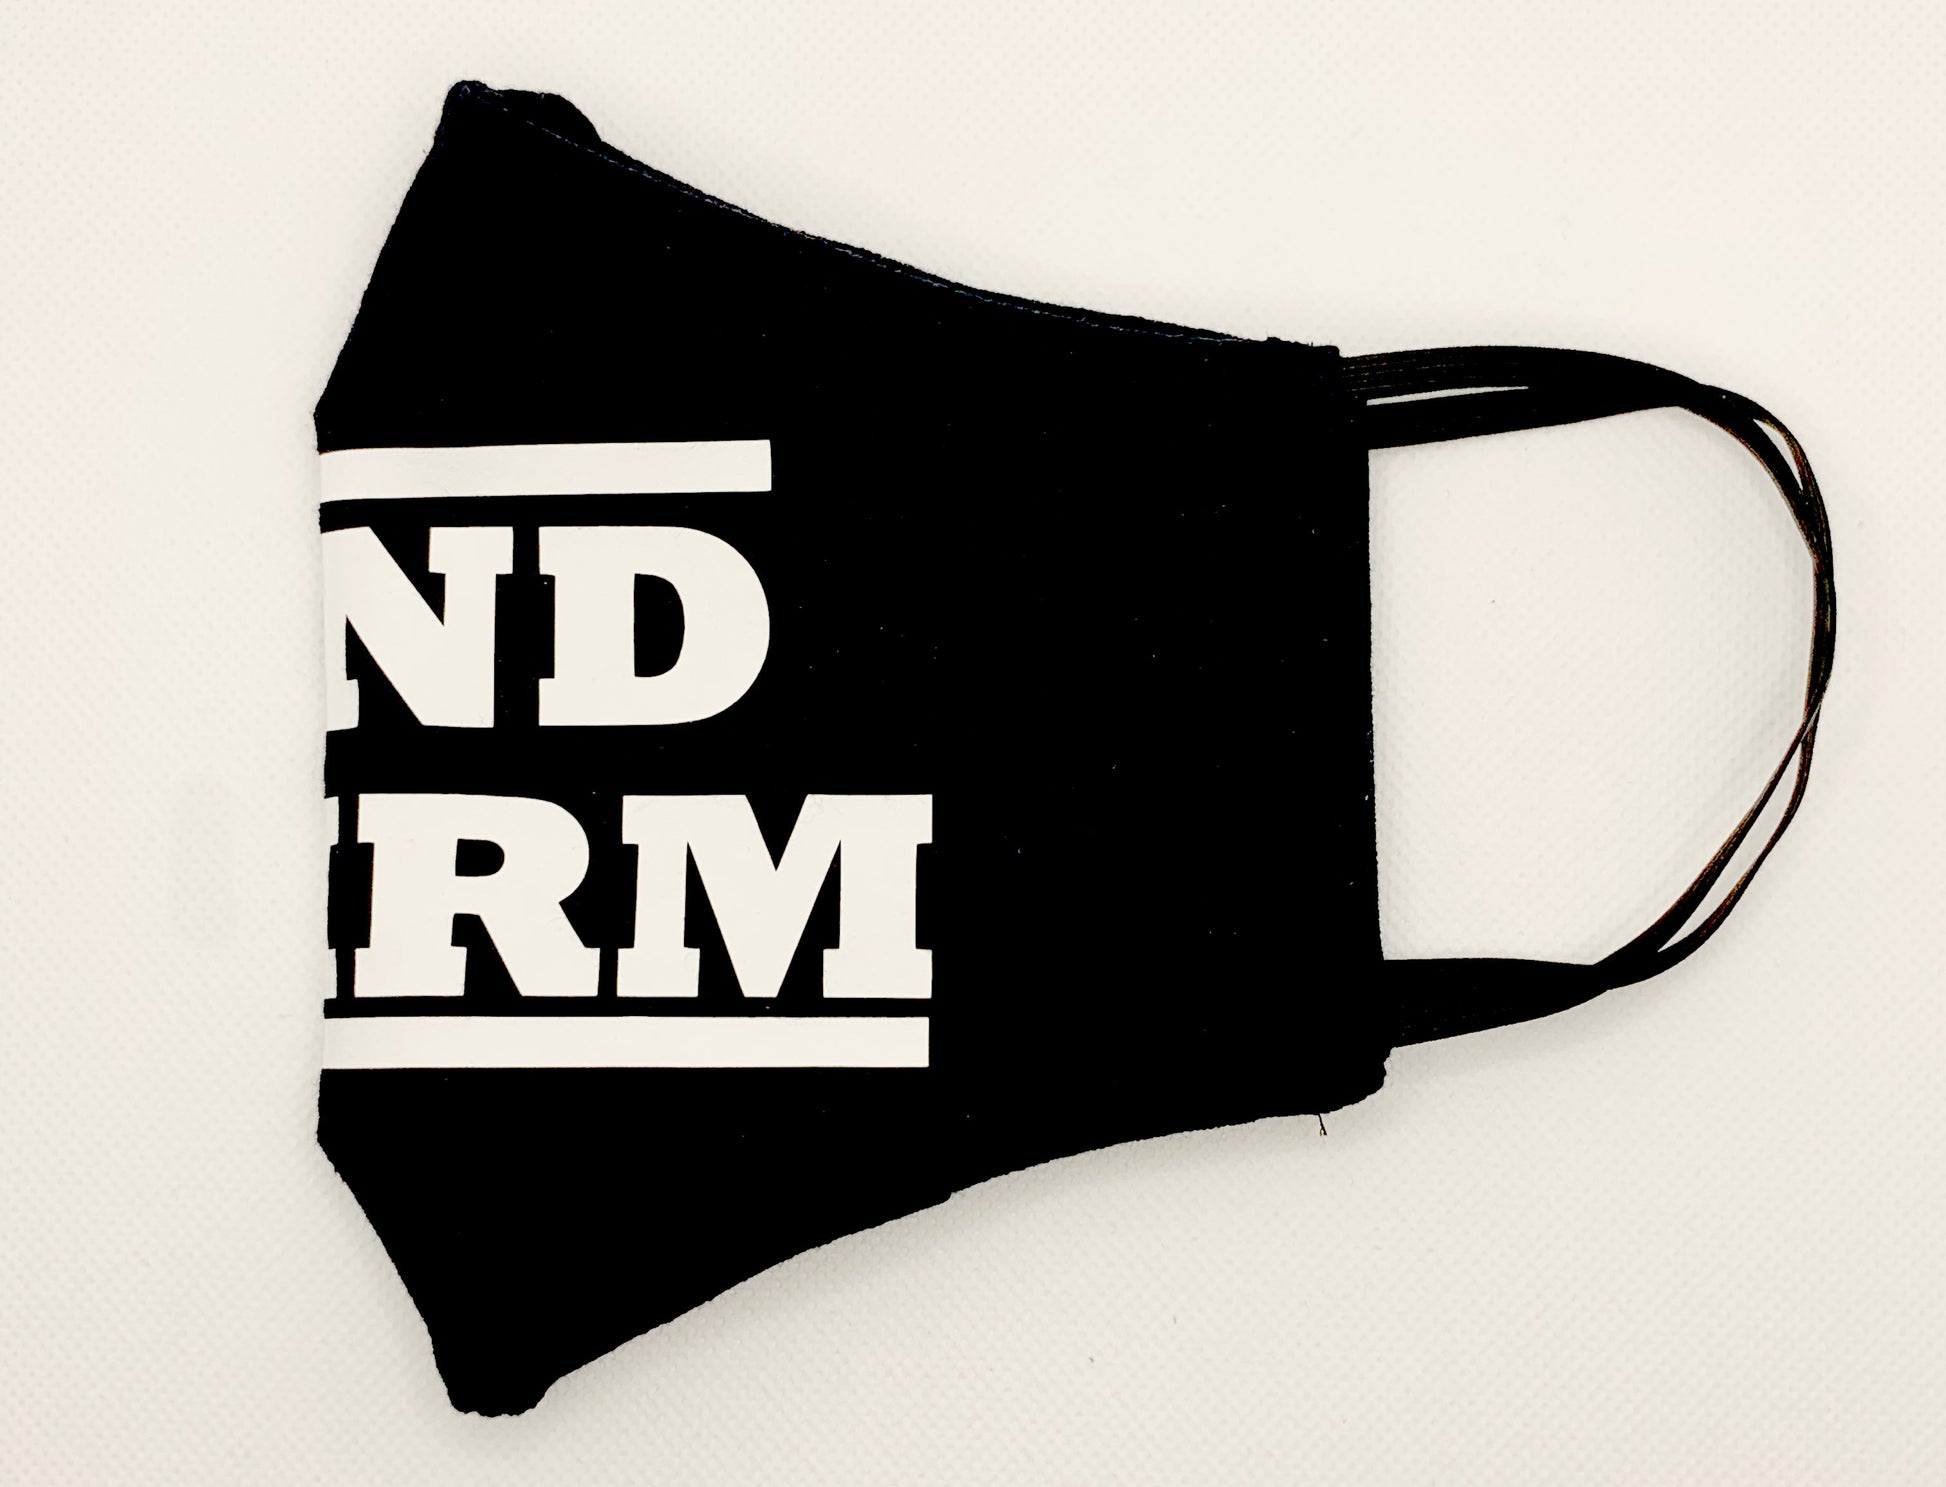 Stand Firm Personal Protection Mask